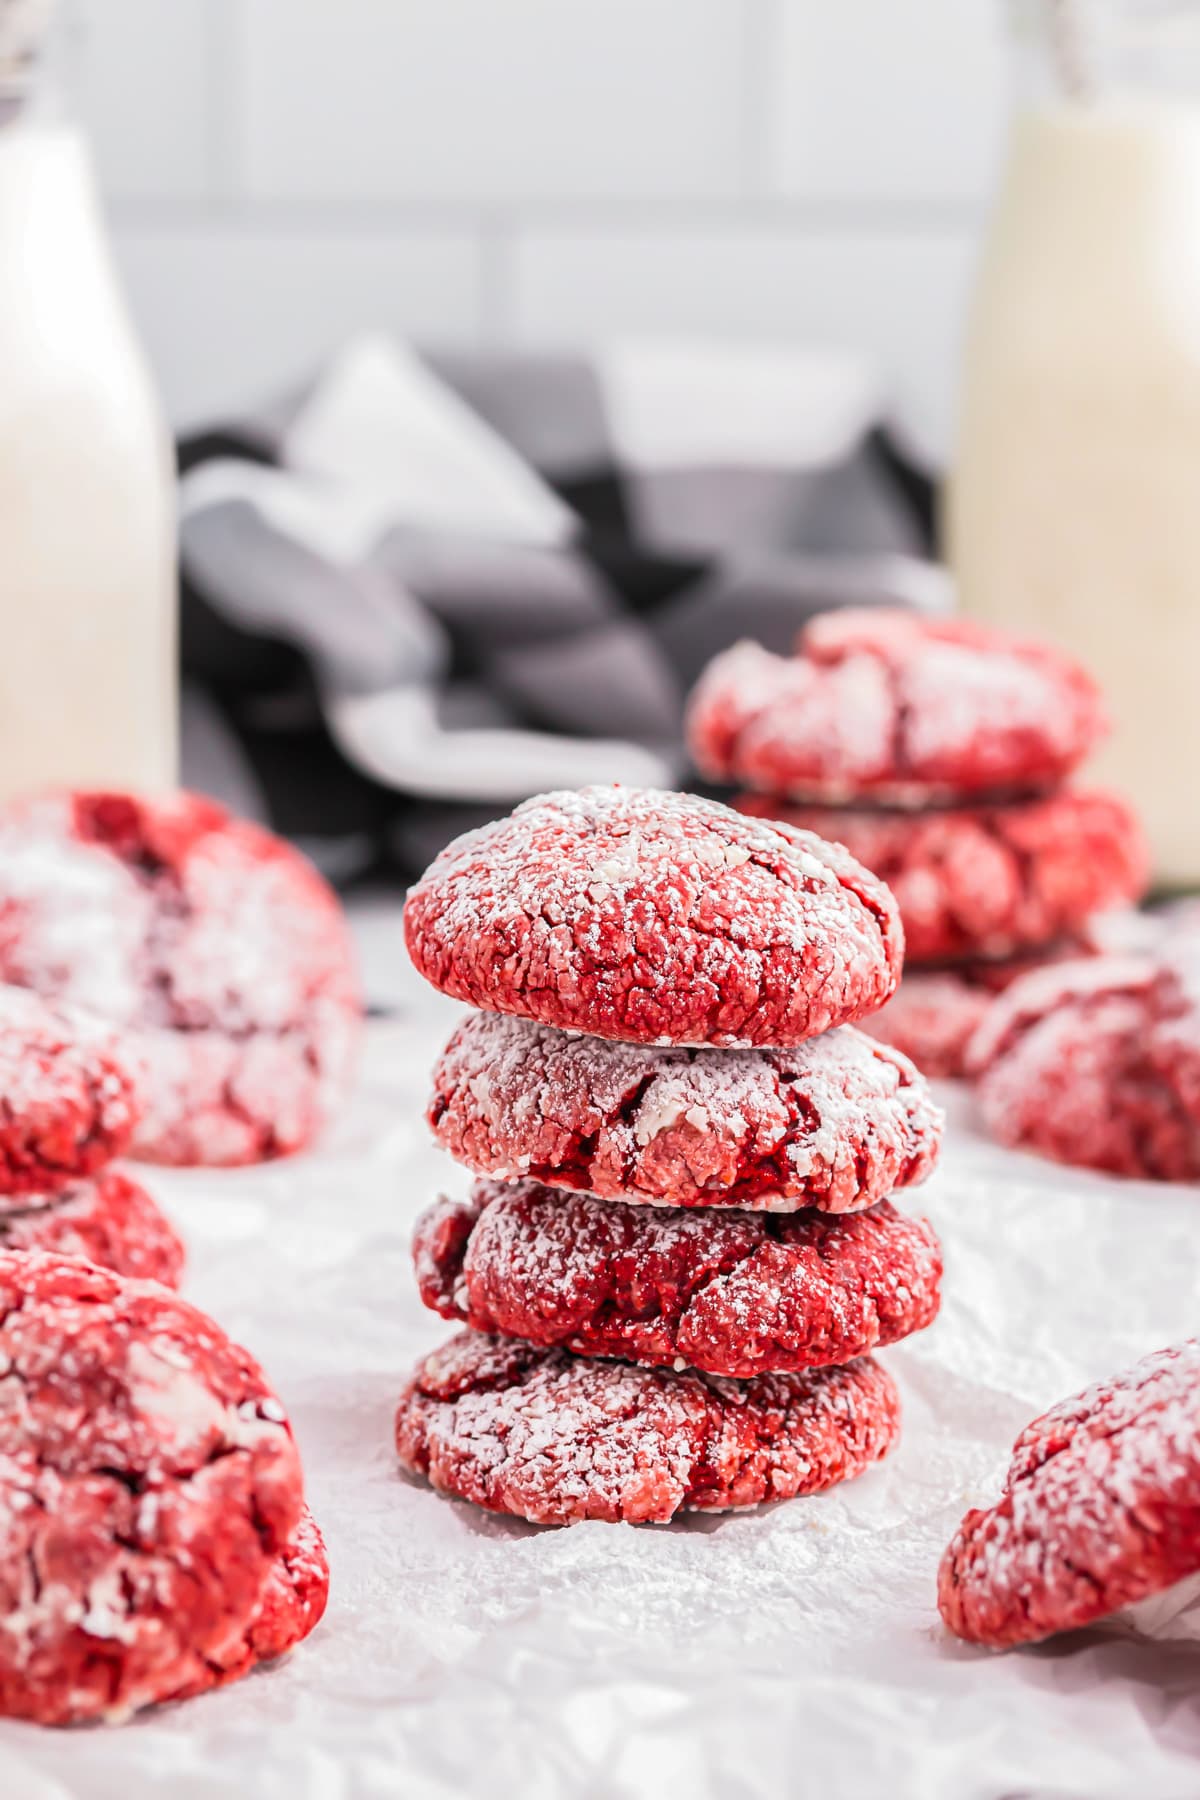 A stack of red velvet cake mix cookies dusted with powdered sugar.